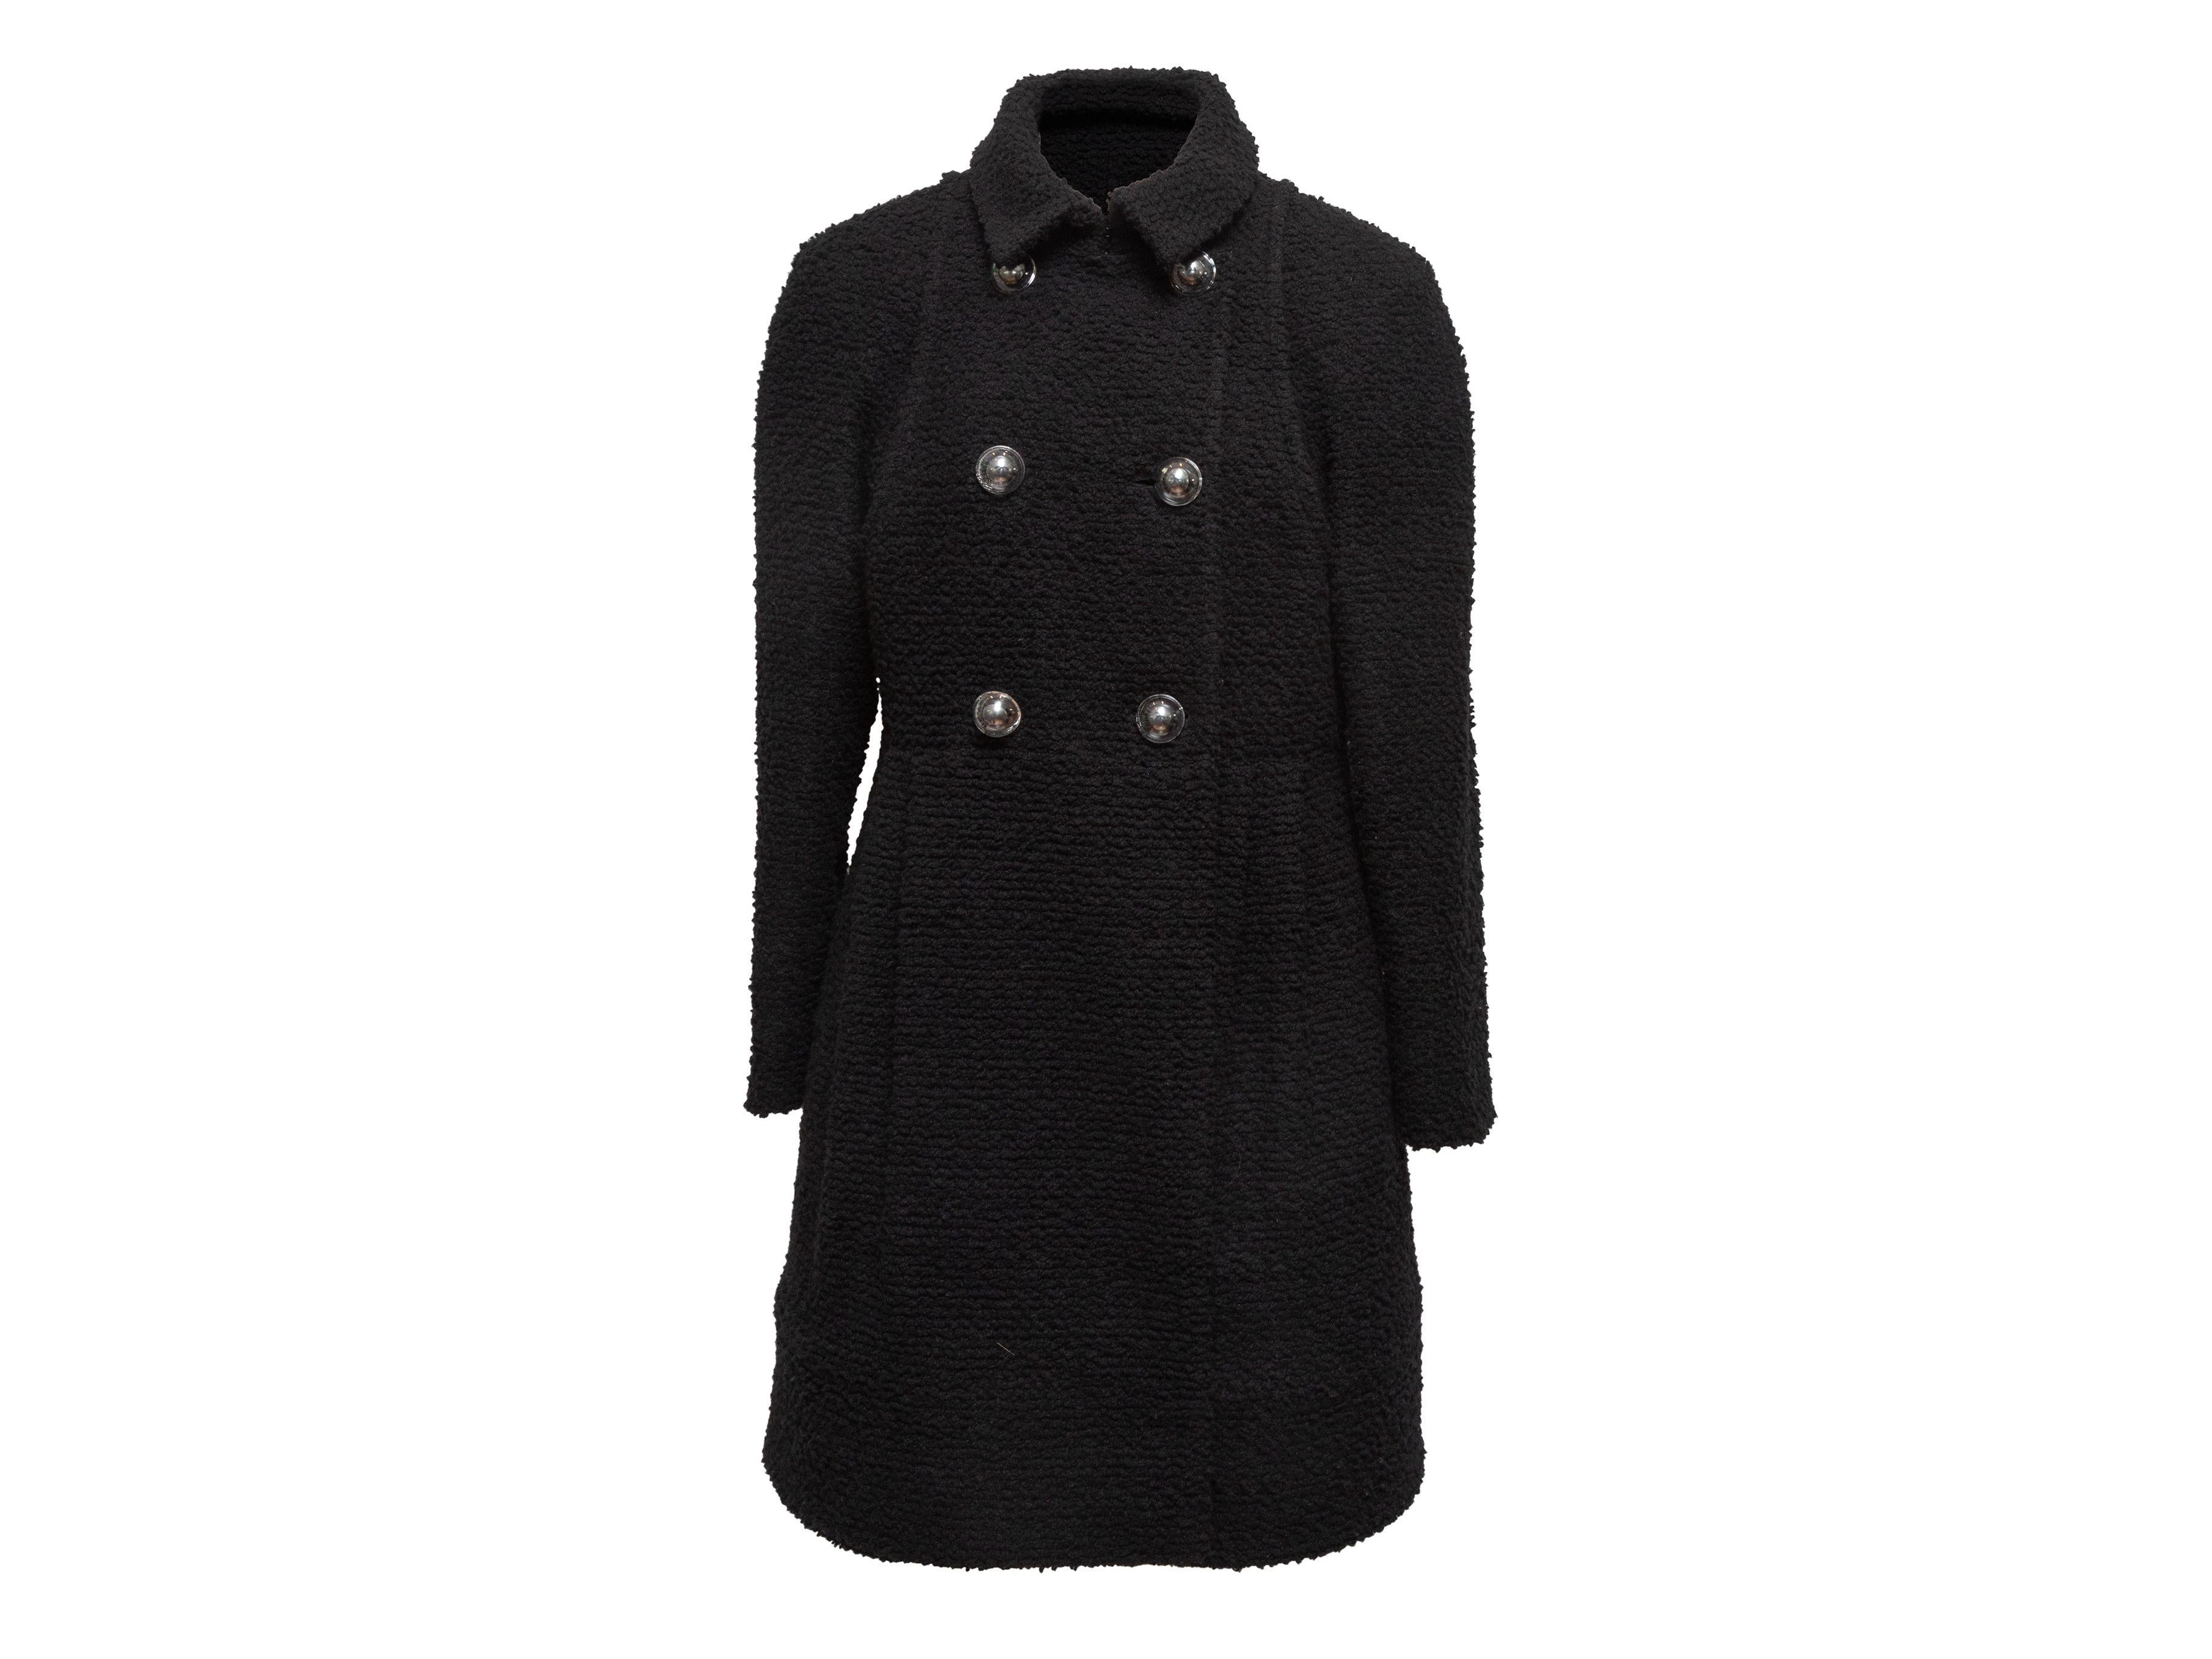 Chanel Black Boucle Wool Double-Breasted Coat 2